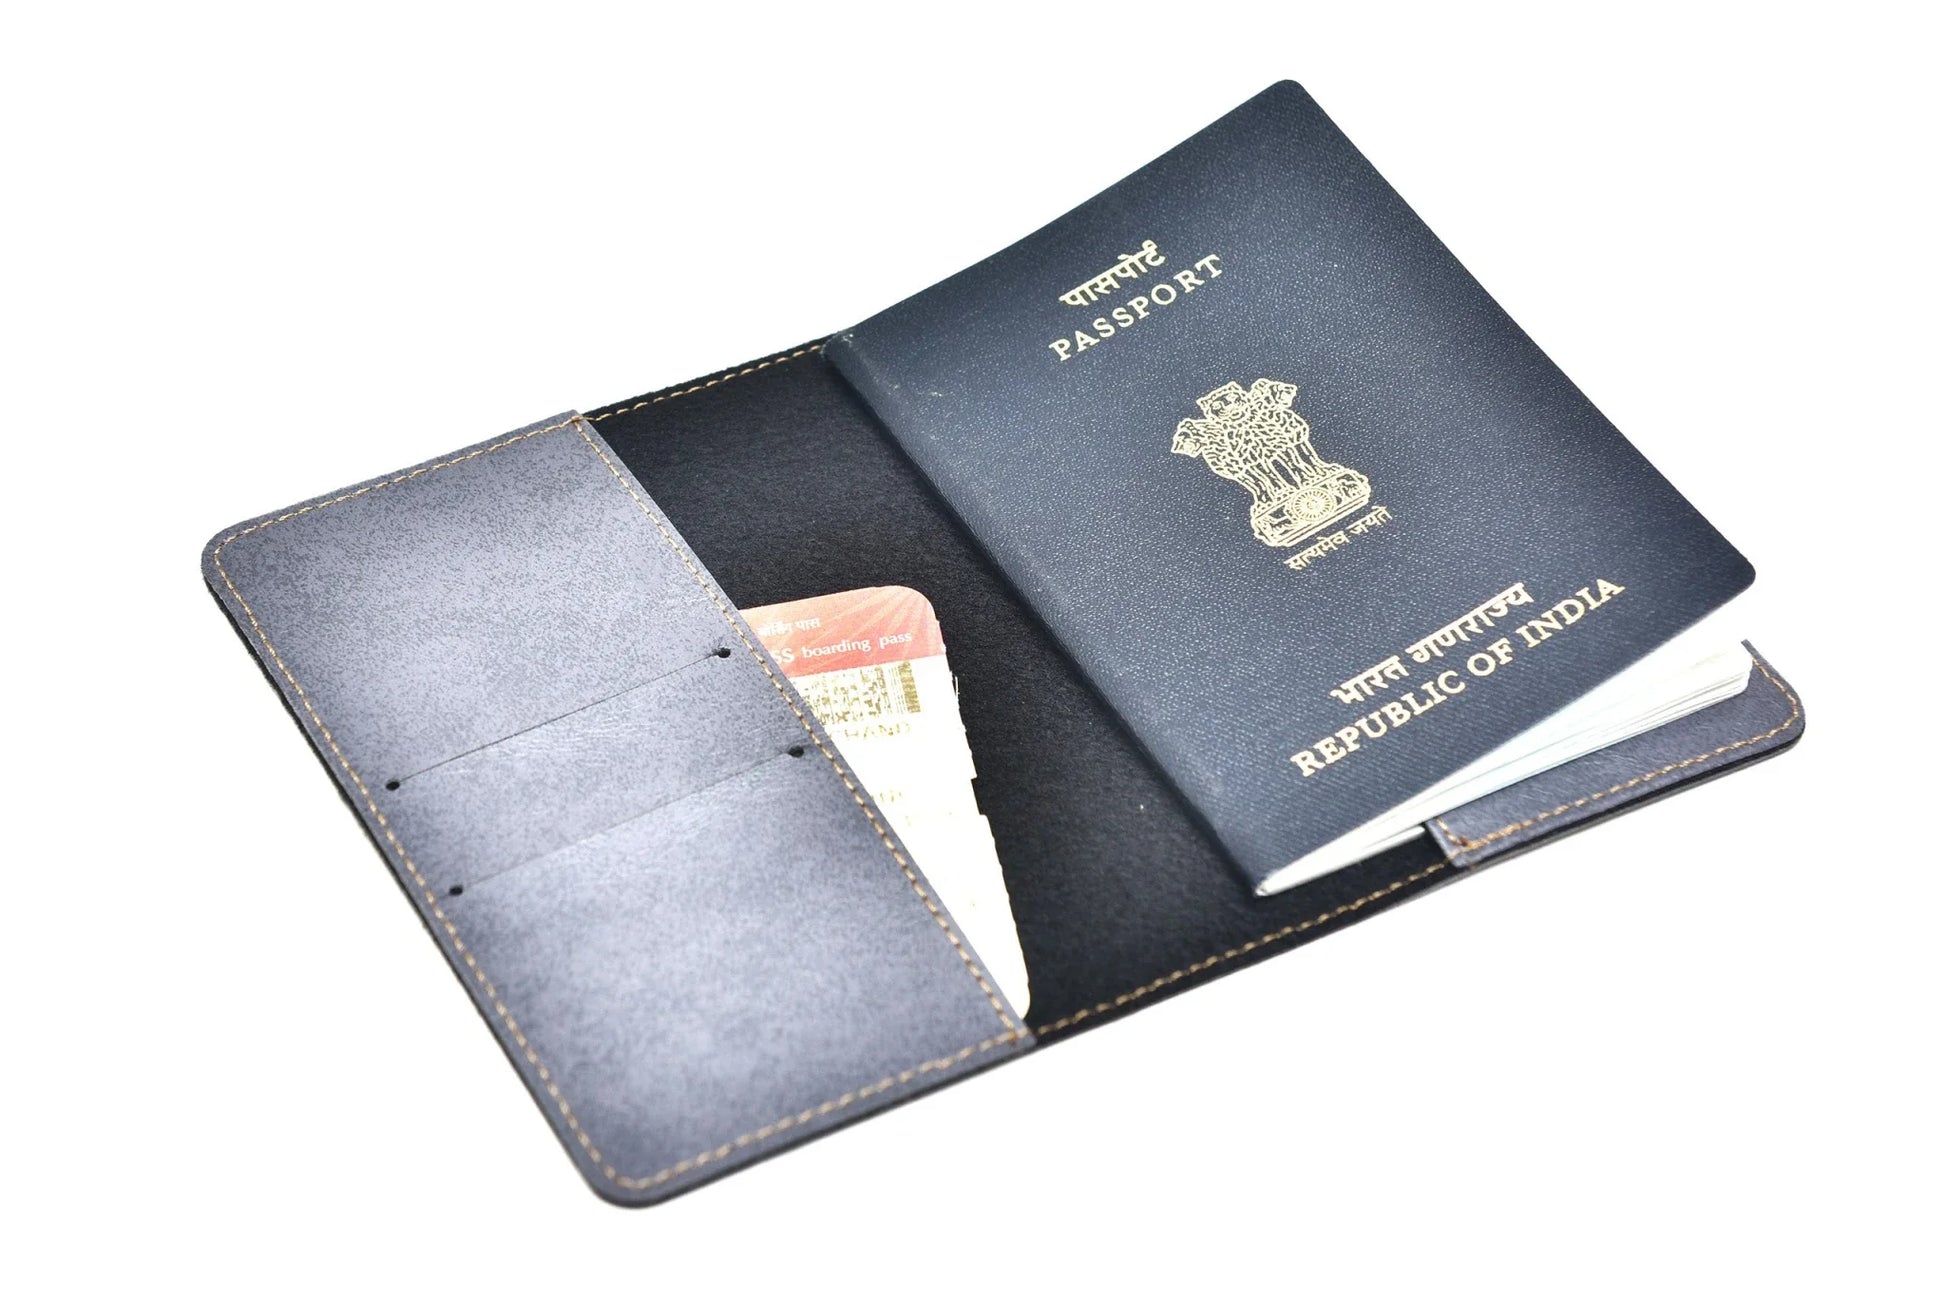 Inside or open view of grey passport case for couples combo